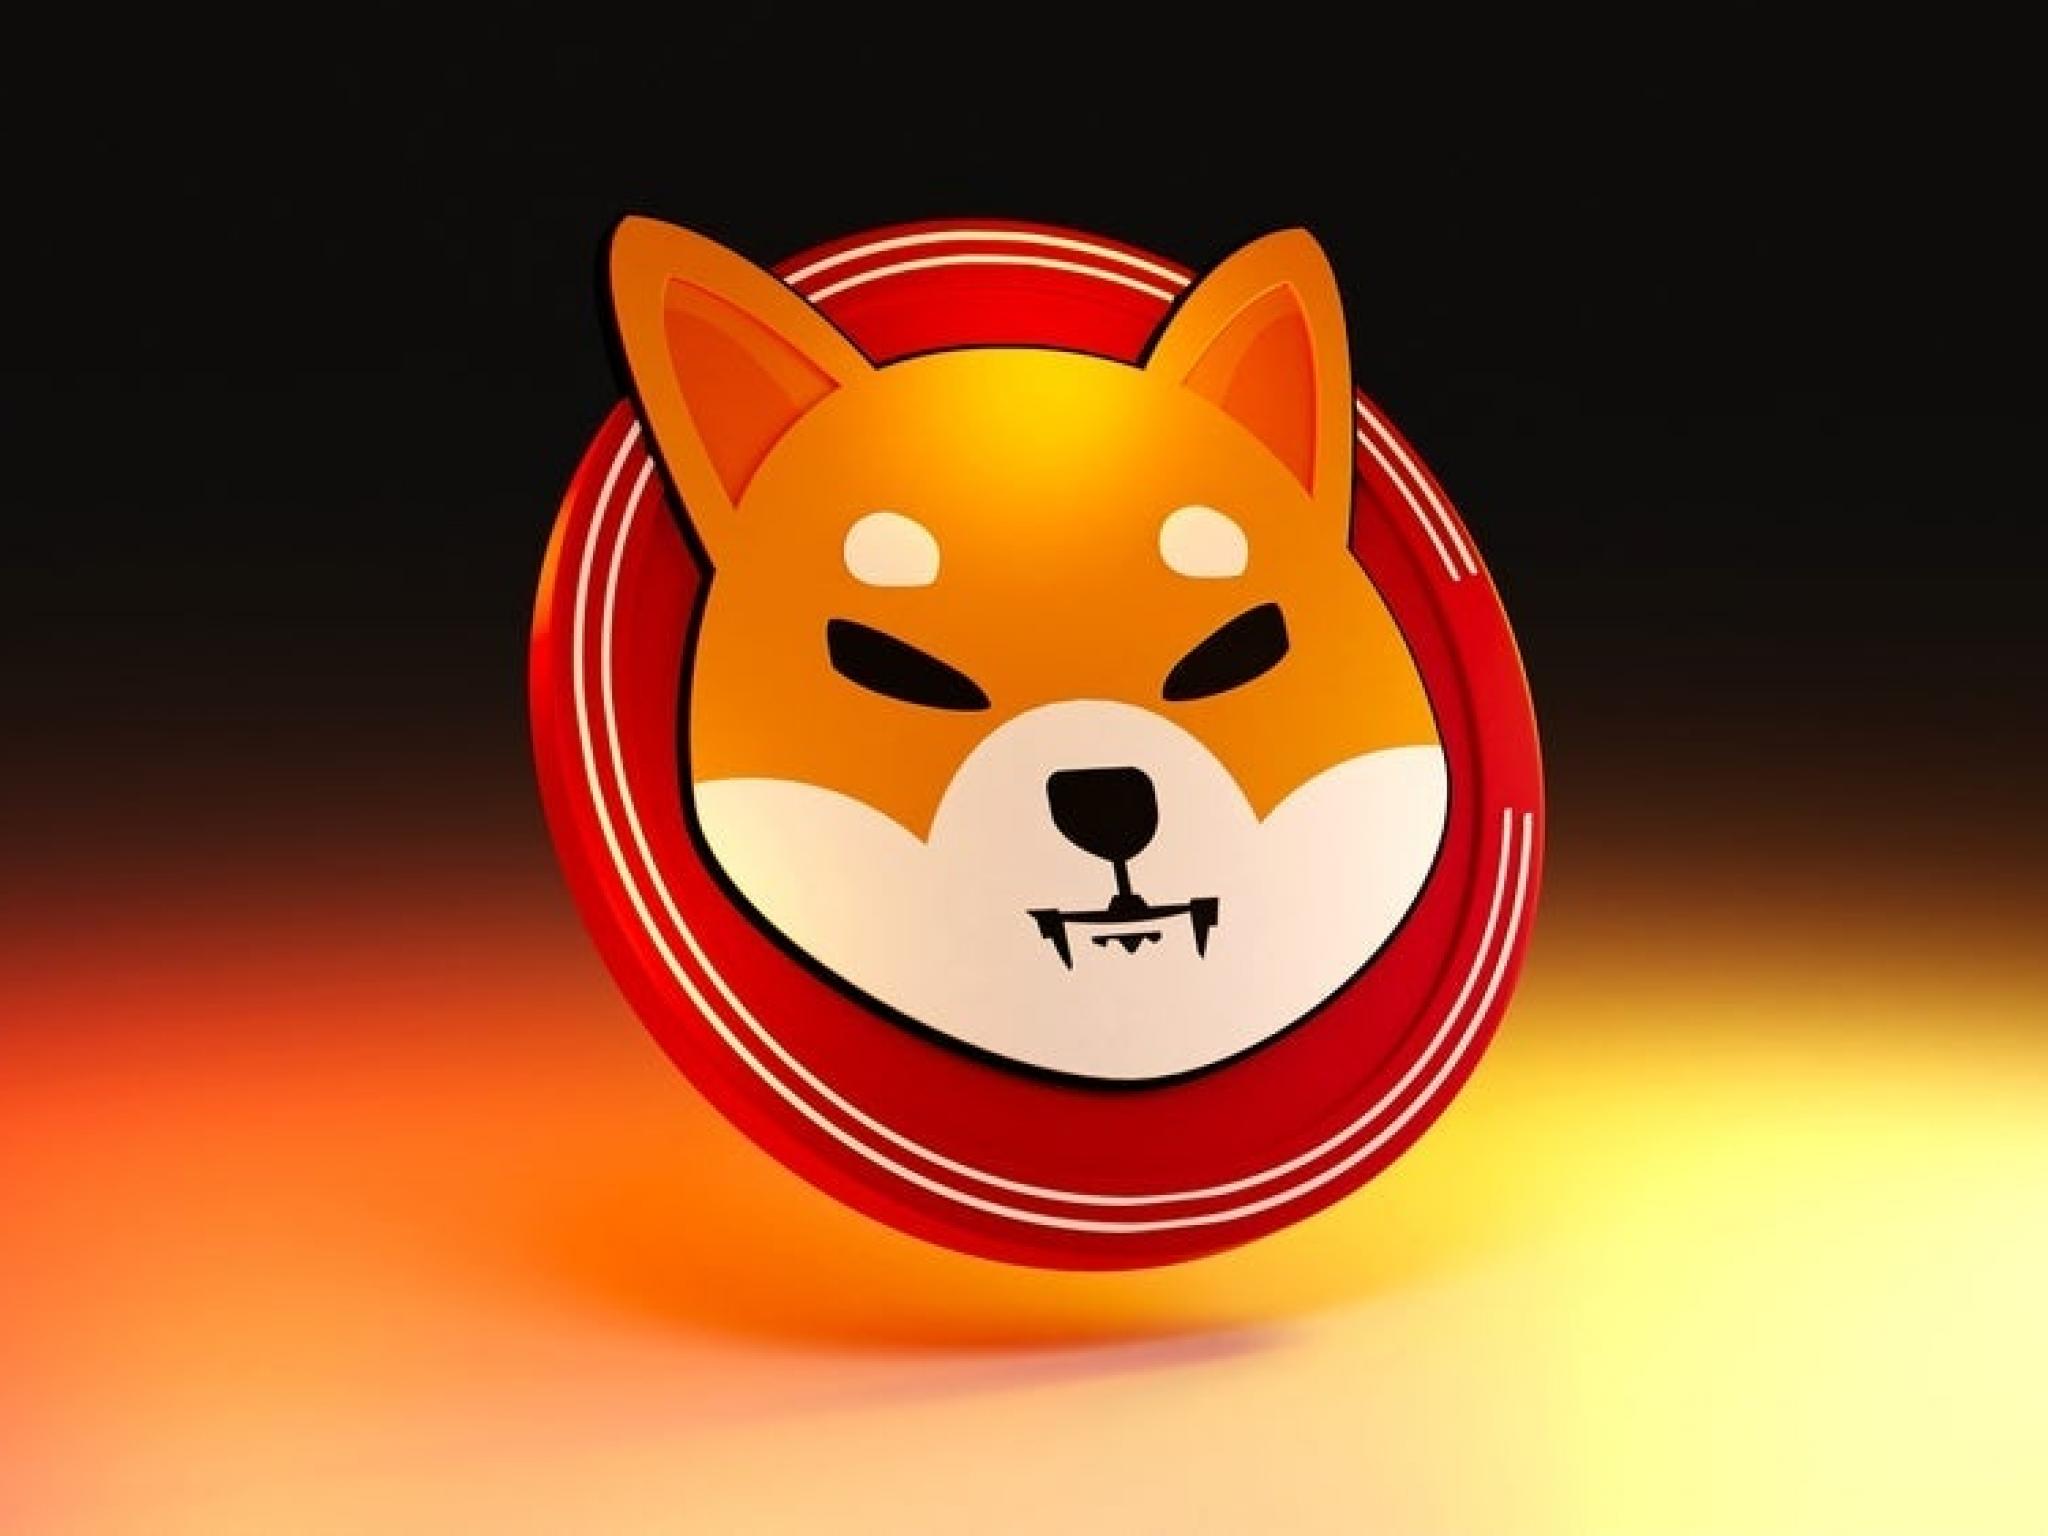  how-did-shiba-inu-become-the-dogecoin-killer-crypto-whale-thinks-its-mission-and-this-one-factor-were-key 